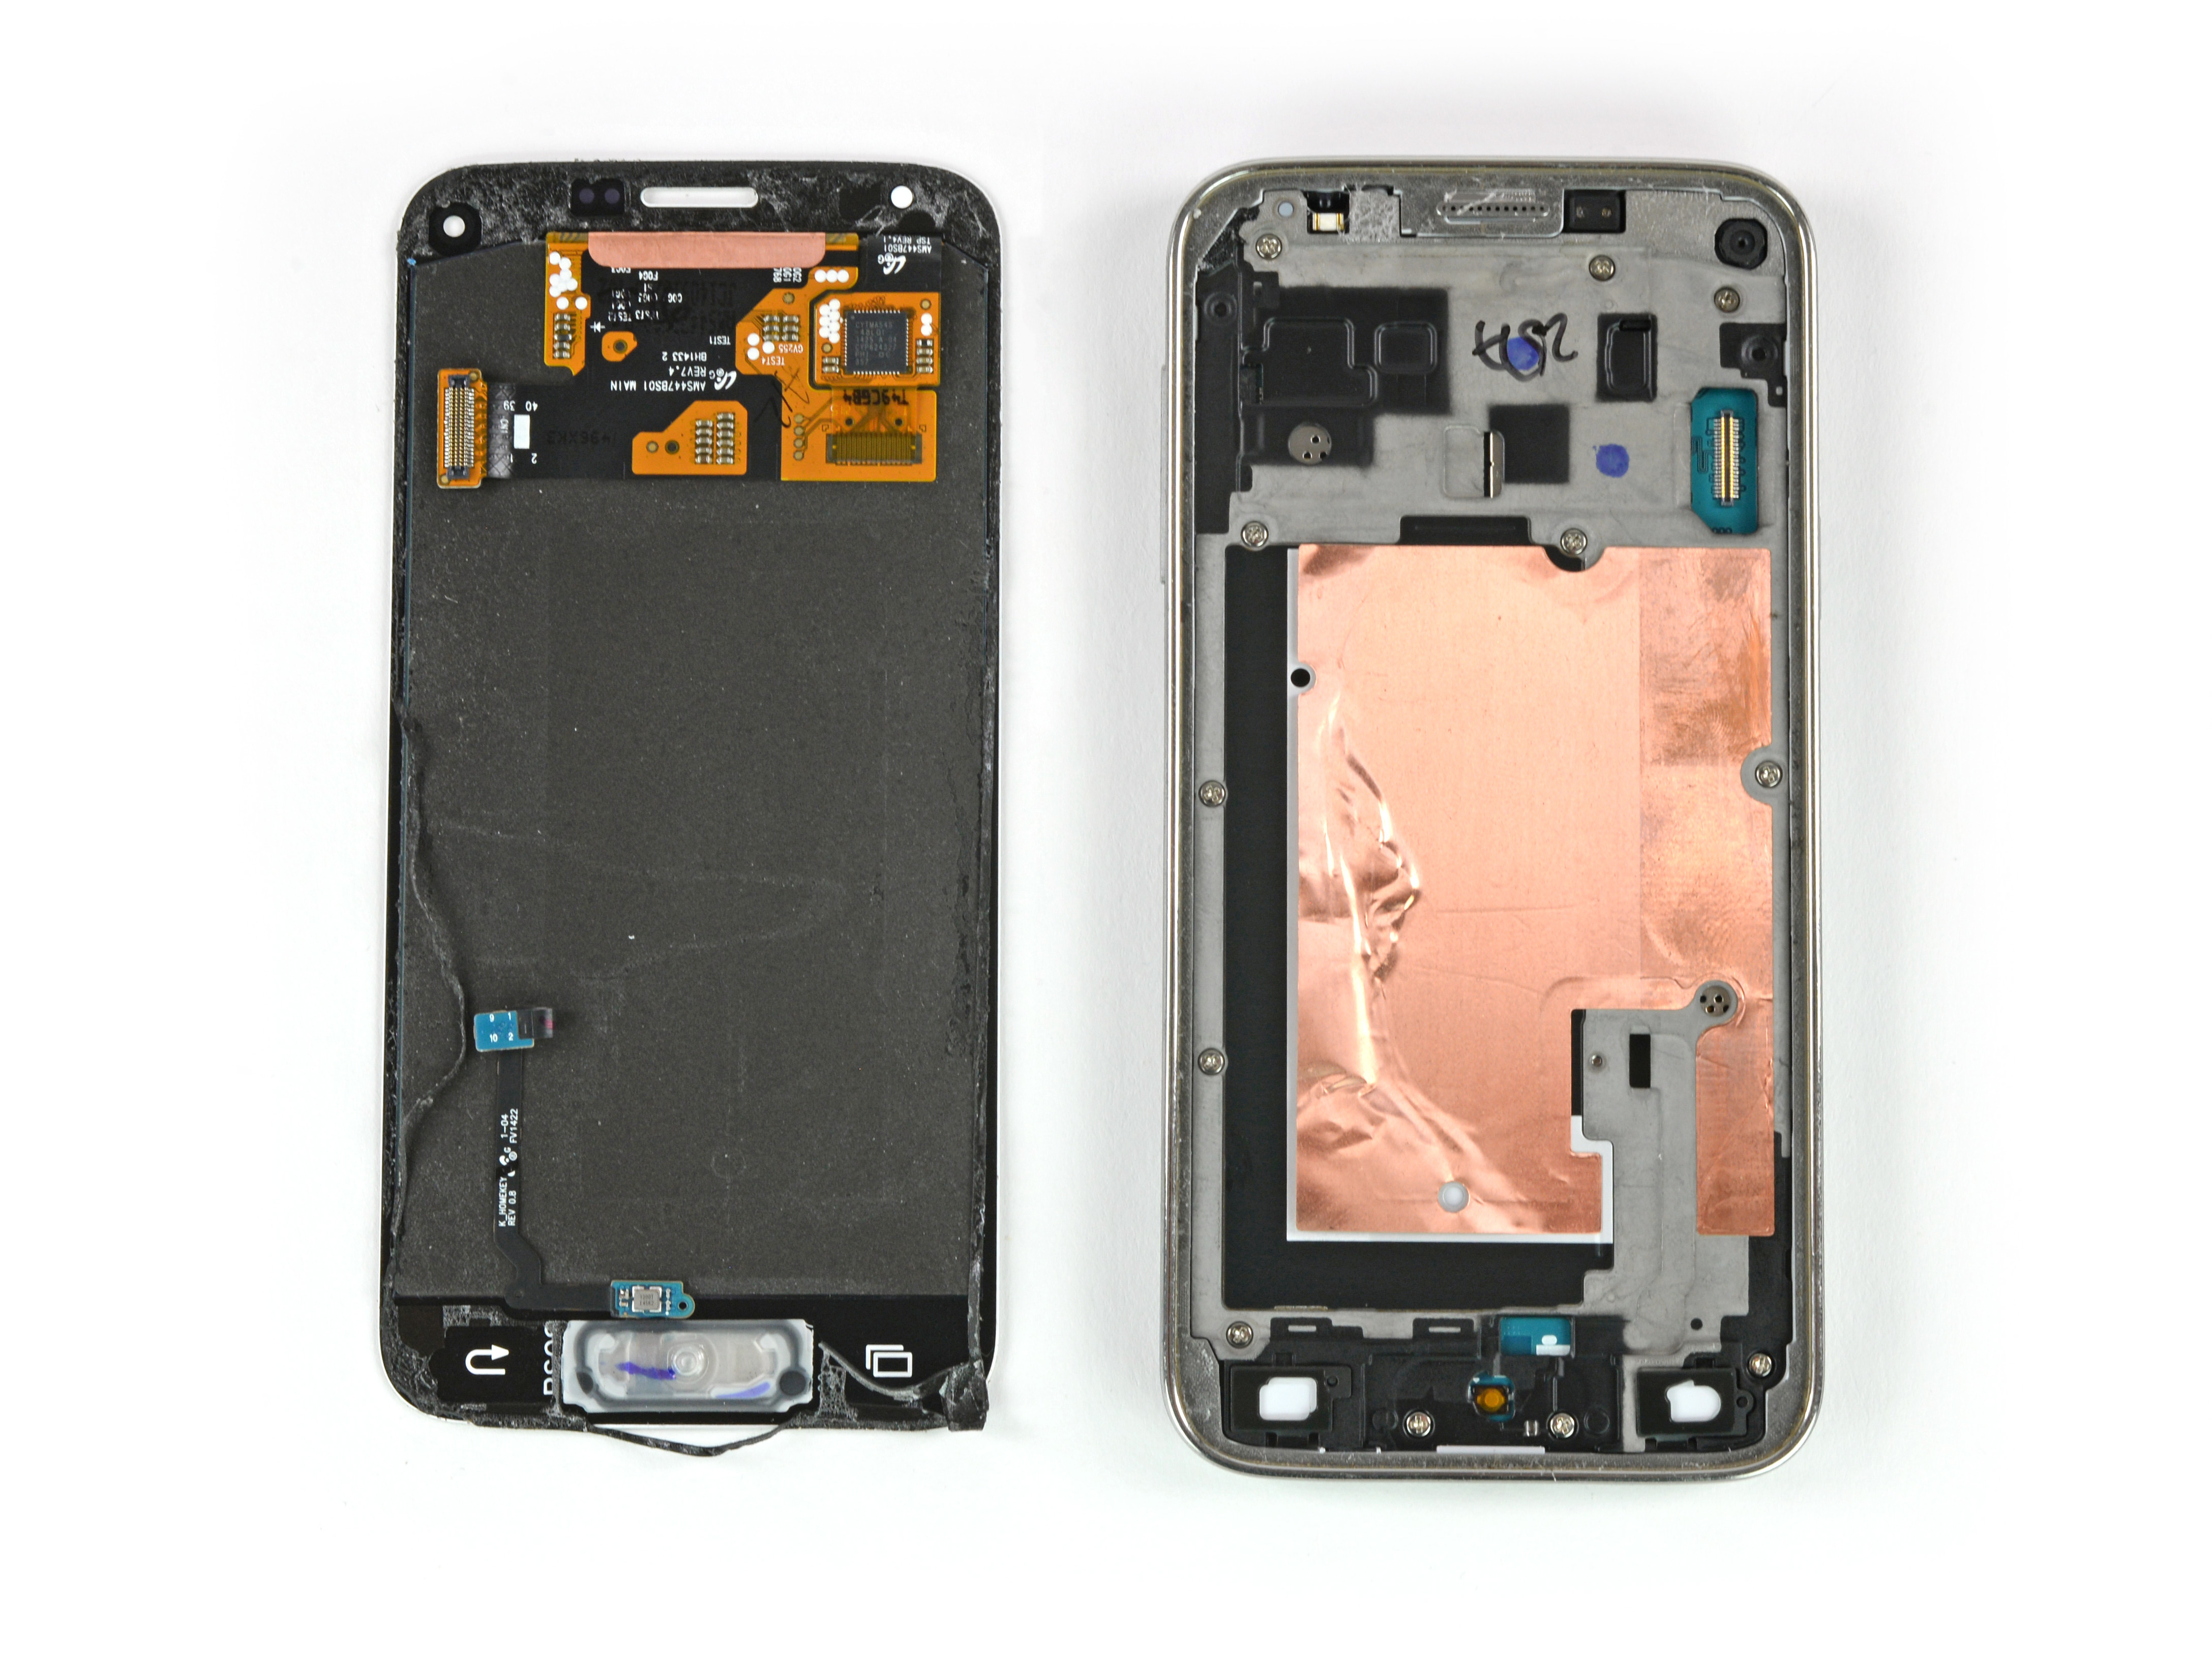 Samsung Galaxy S5 Mini Display Assembly Replacement